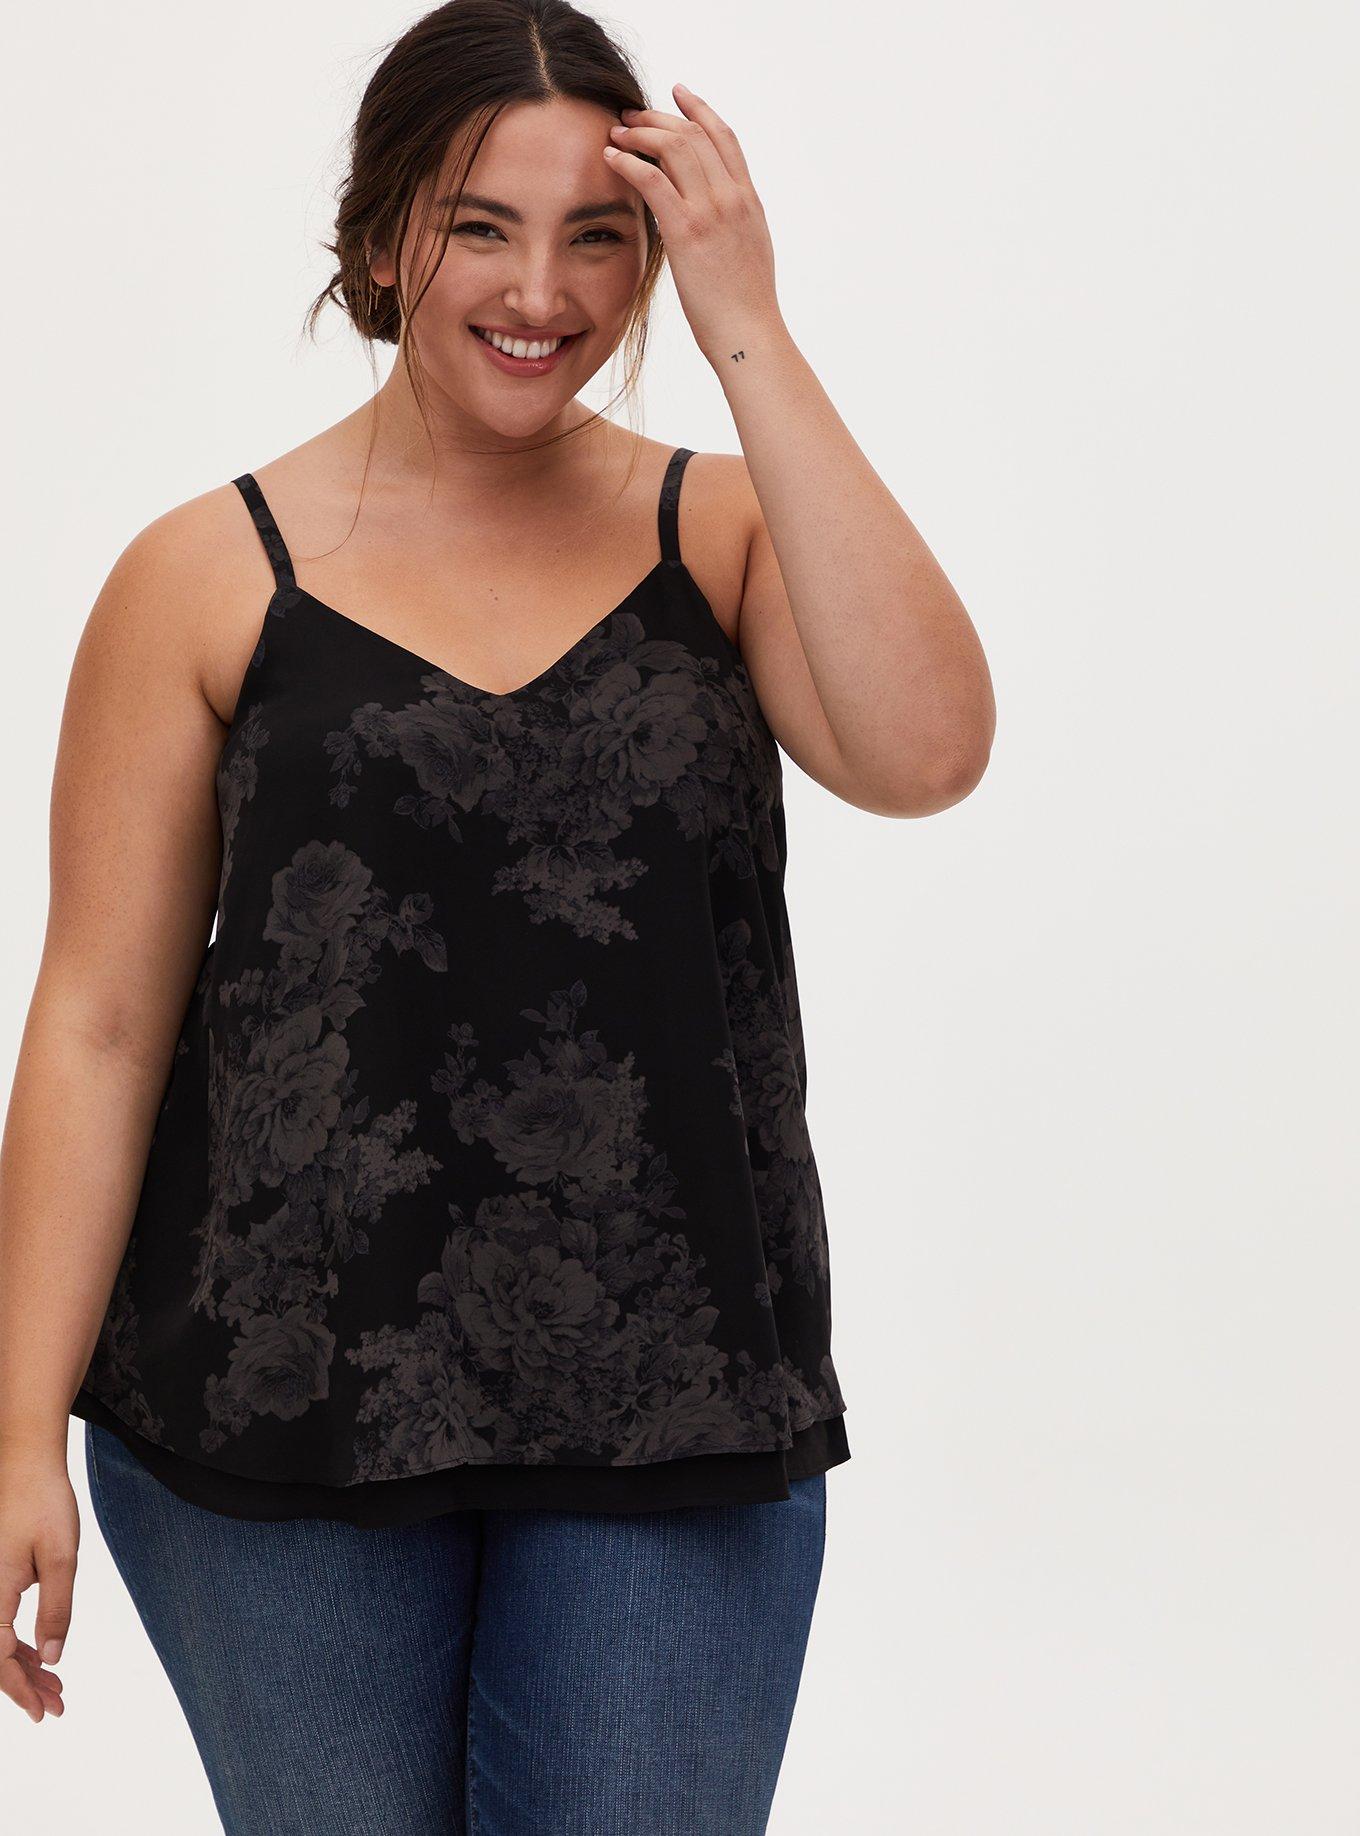 Plus Size Swing Lace Flowy Tank Top for Women Cami with Built-in Bra Basic  Tops